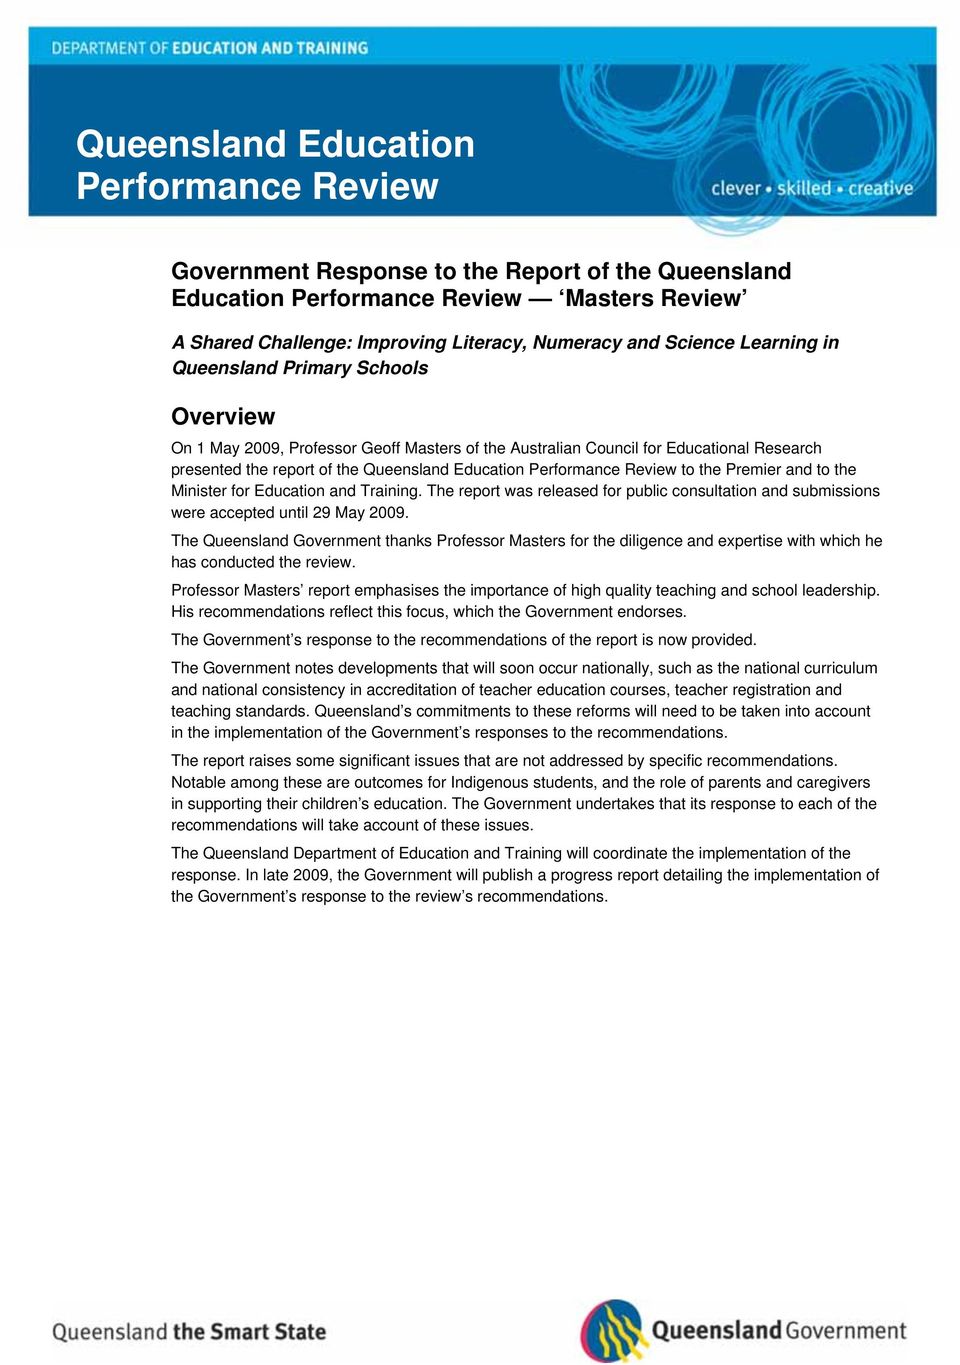 the Premier and to the Minister for Education and Training. The report was released for public consultation and submissions were accepted until 29 May 2009.